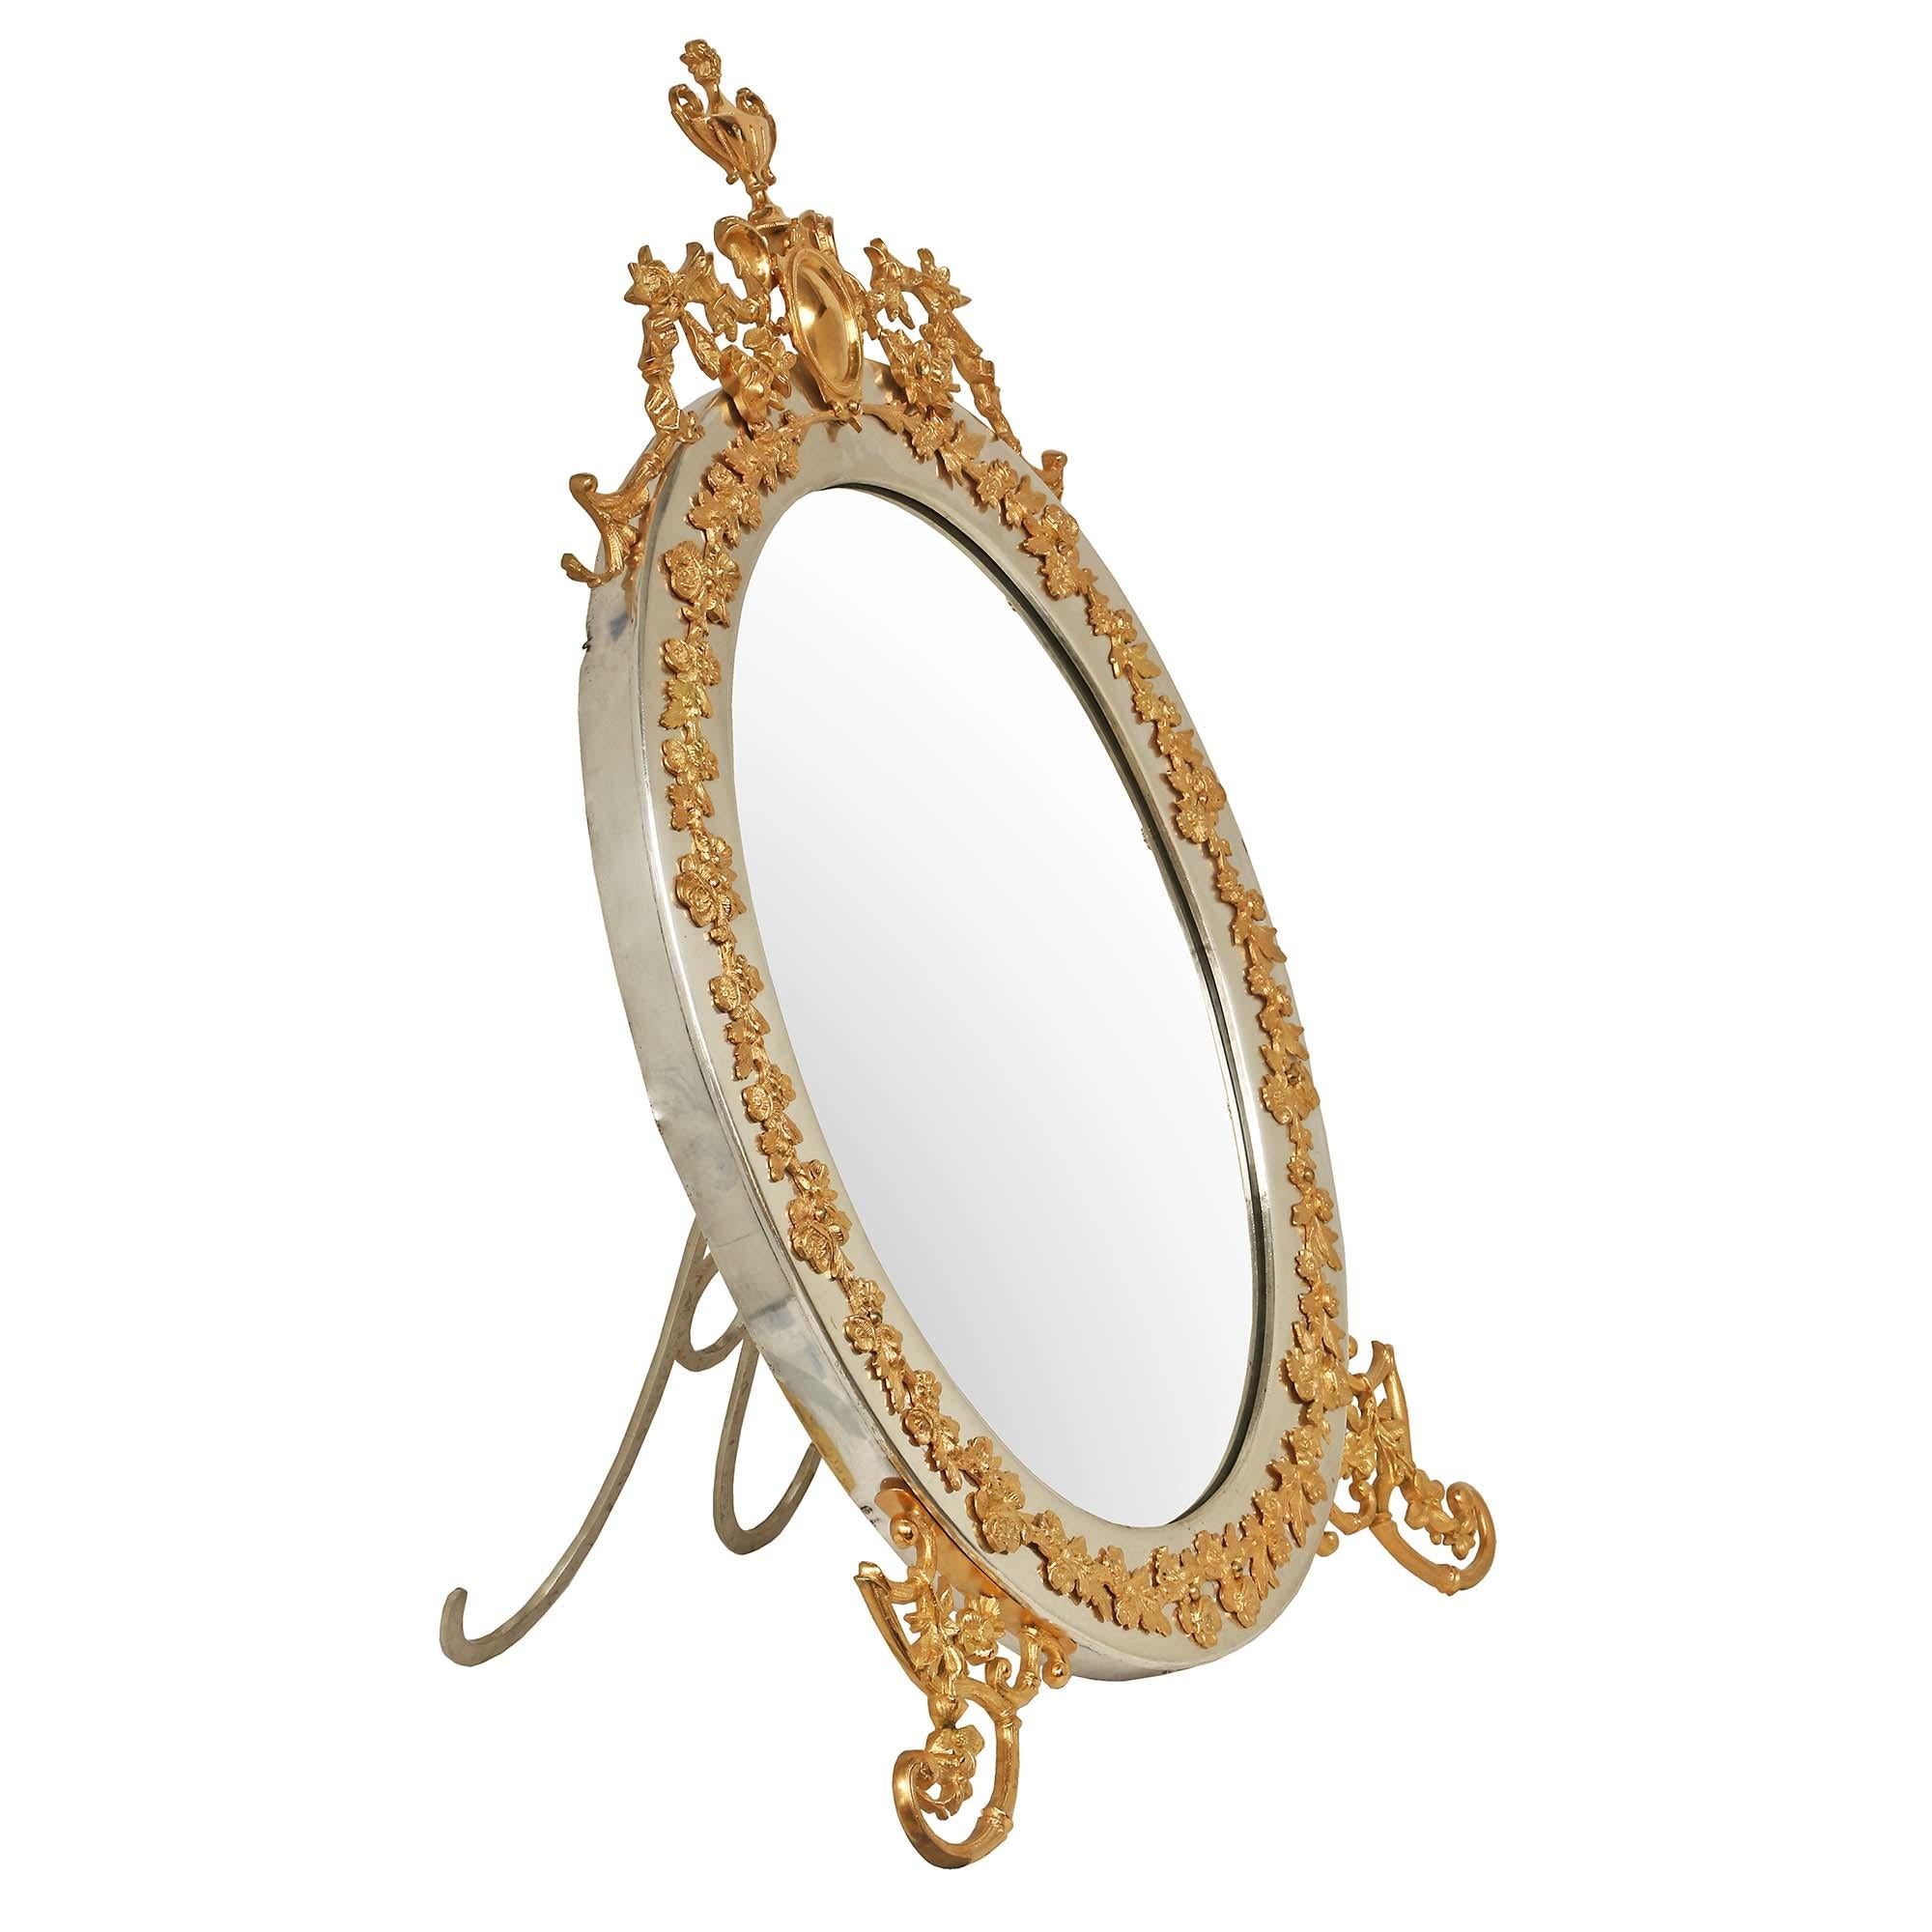 A unique and extremely elegant Italian 19th century Louis XVI st. ormolu and silvered bronze large scale lady's vanity mirror. The mirror is raised by two richly chased ormolu scrolled bamboo designed supports with foliate accents, and one fold out